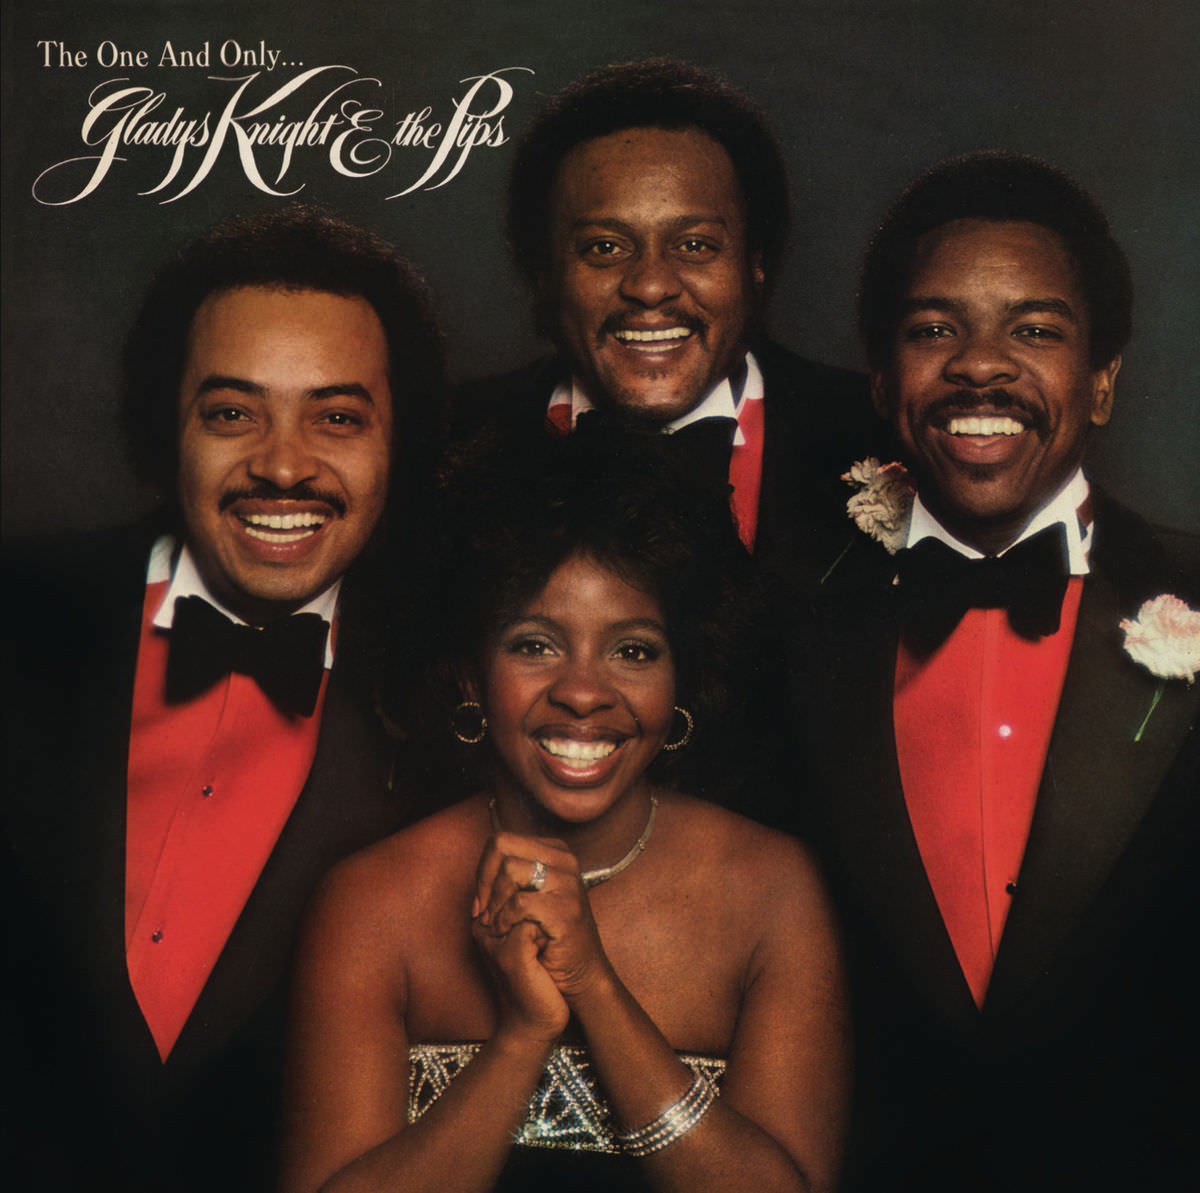 Gladys Knight & The Pips – The One And Only (1978/2015) {Expanded Edition 2014} [FLAC 24bit/96kHz]